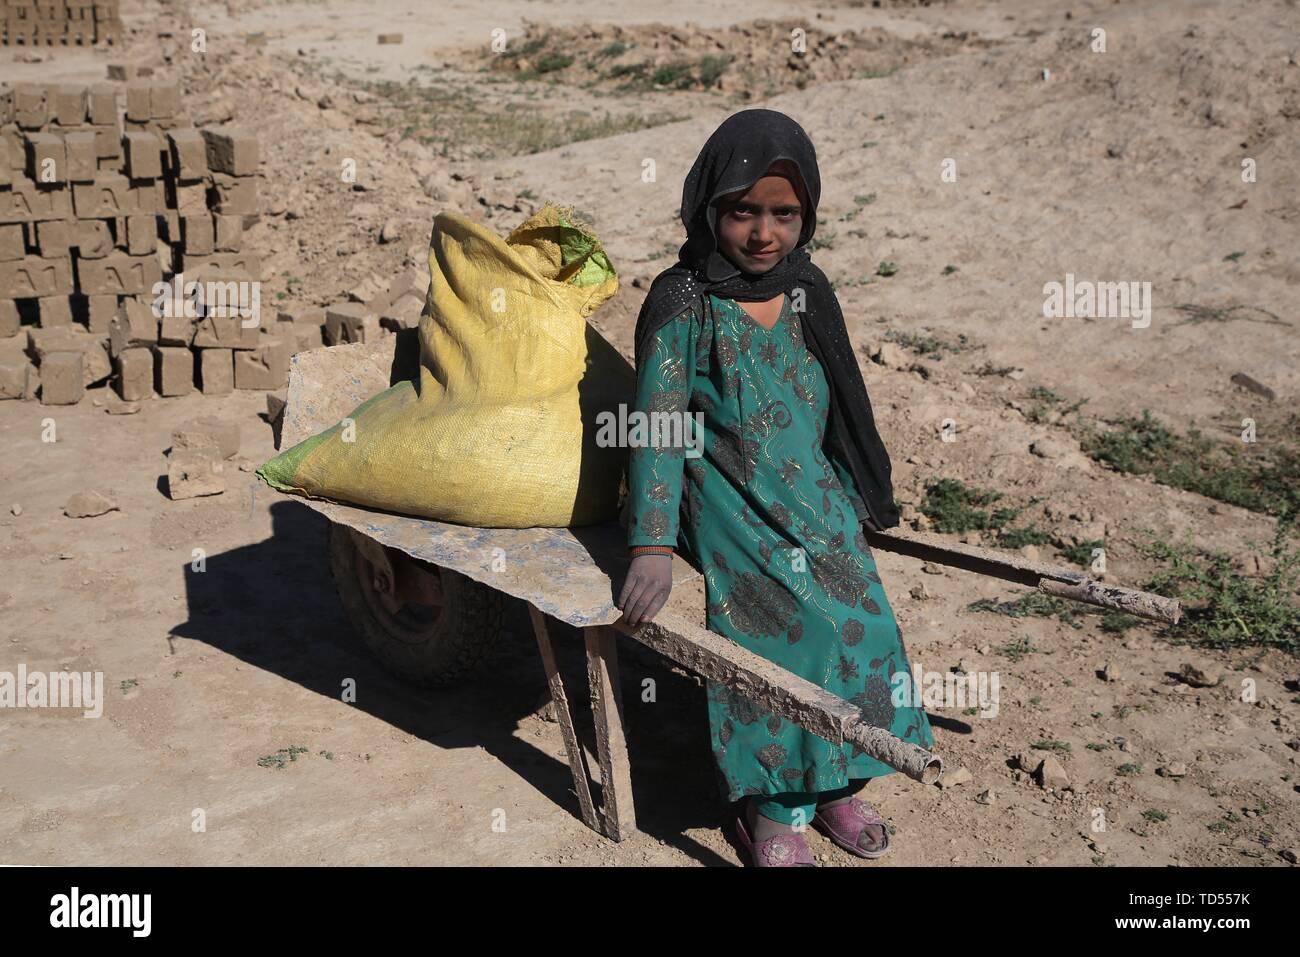 Kabul, Afghanistan. 12th June, 2019. An Afghan child works at a brick factory in Kabul, capital of Afghanistan, June 12, 2019. The decades-long war and extreme poverty have taken the toll on Afghan children, with around 30 percent of those between six and 15 years old having to work long hours to support their families, and many do not go to school. TO GO WITH 'Feature: Child labor still a worry in Afghanistan' Credit: Rahmat Alizadah/Xinhua/Alamy Live News Stock Photo